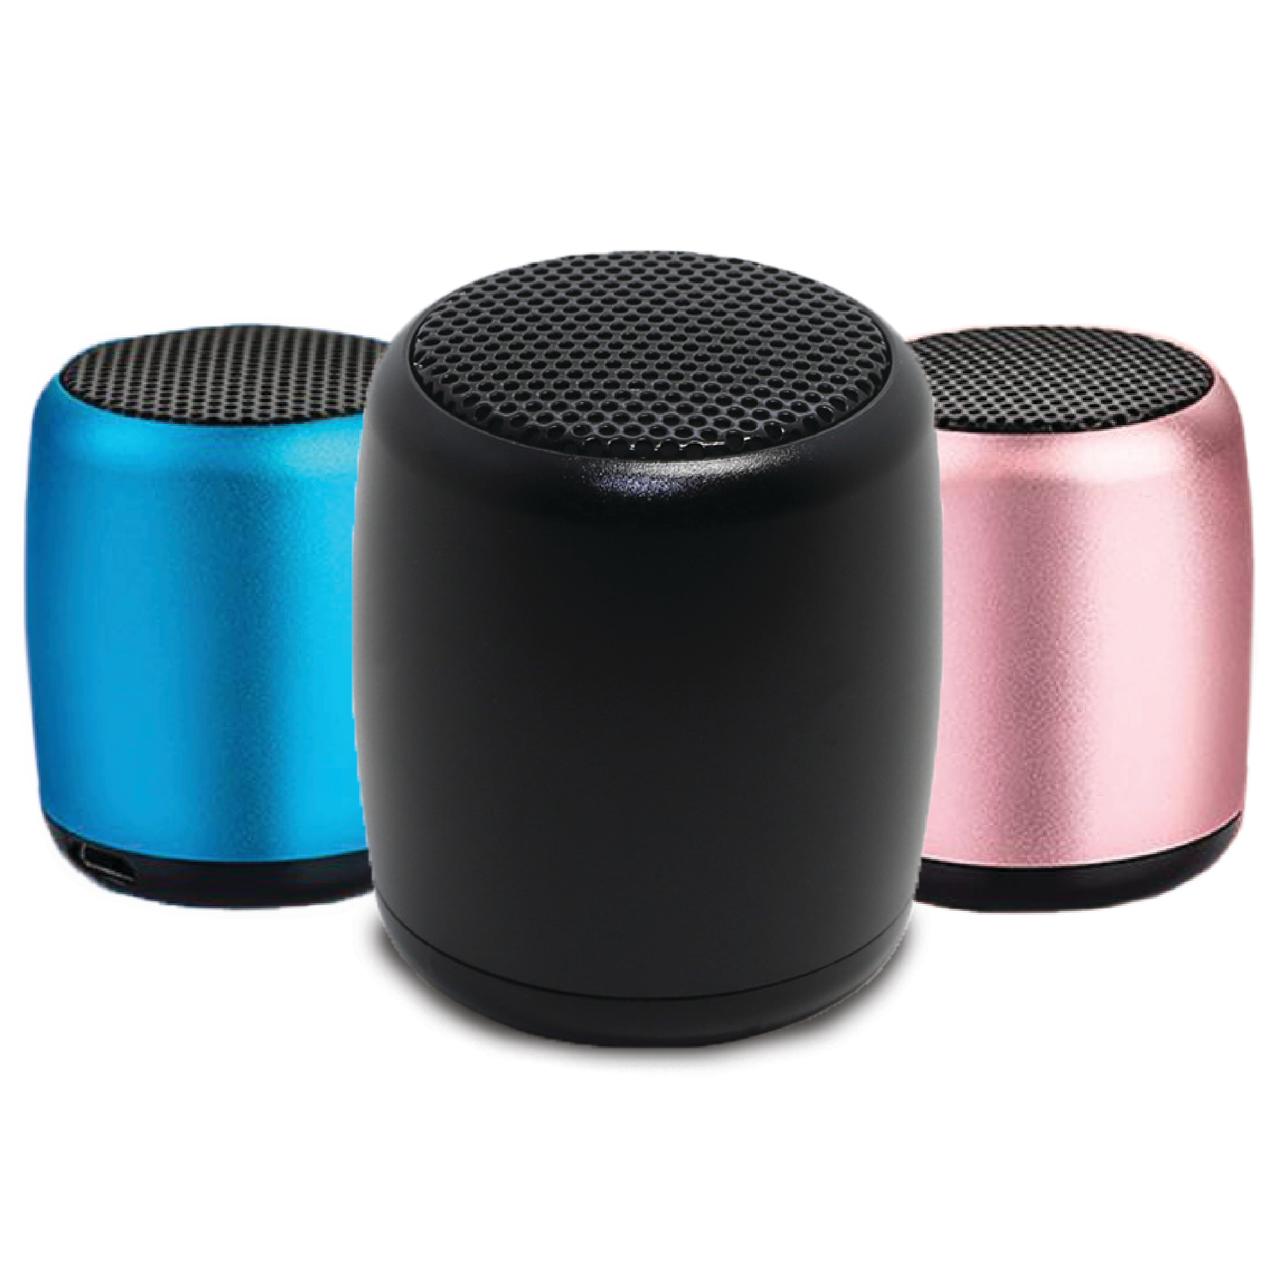 Ematic Portable Bluetooth Speaker and Speakerphone For Smartphone, Laptop and More - Black - image 1 of 9